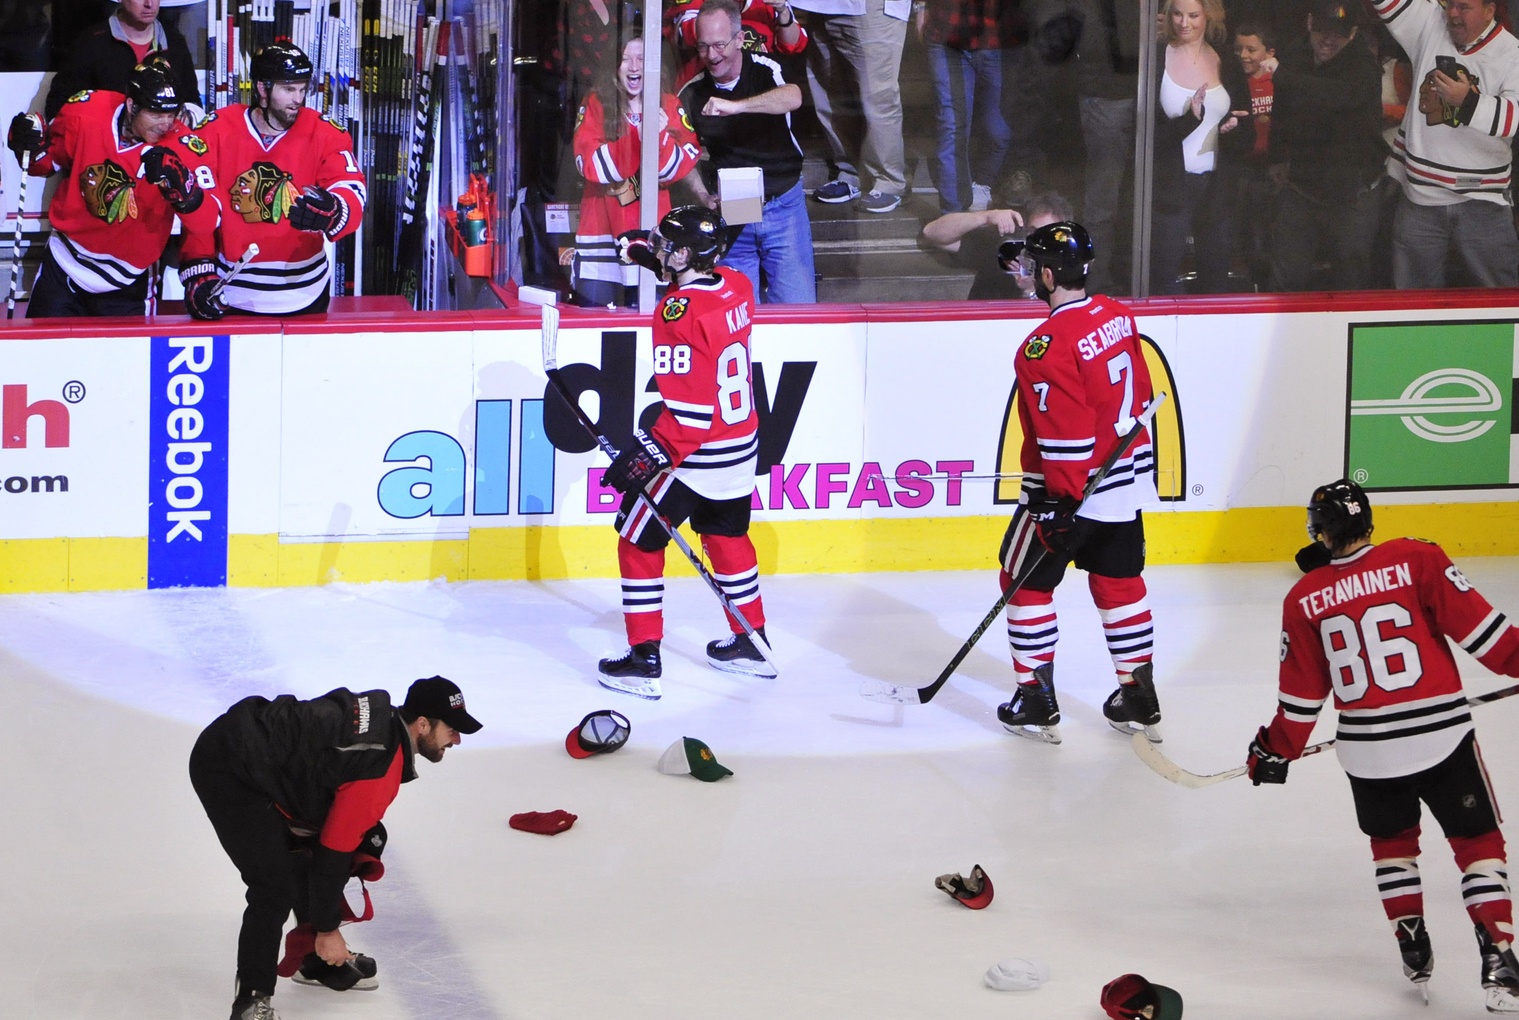 Patrick Kane & Jonathan Toews reach another milestone with the